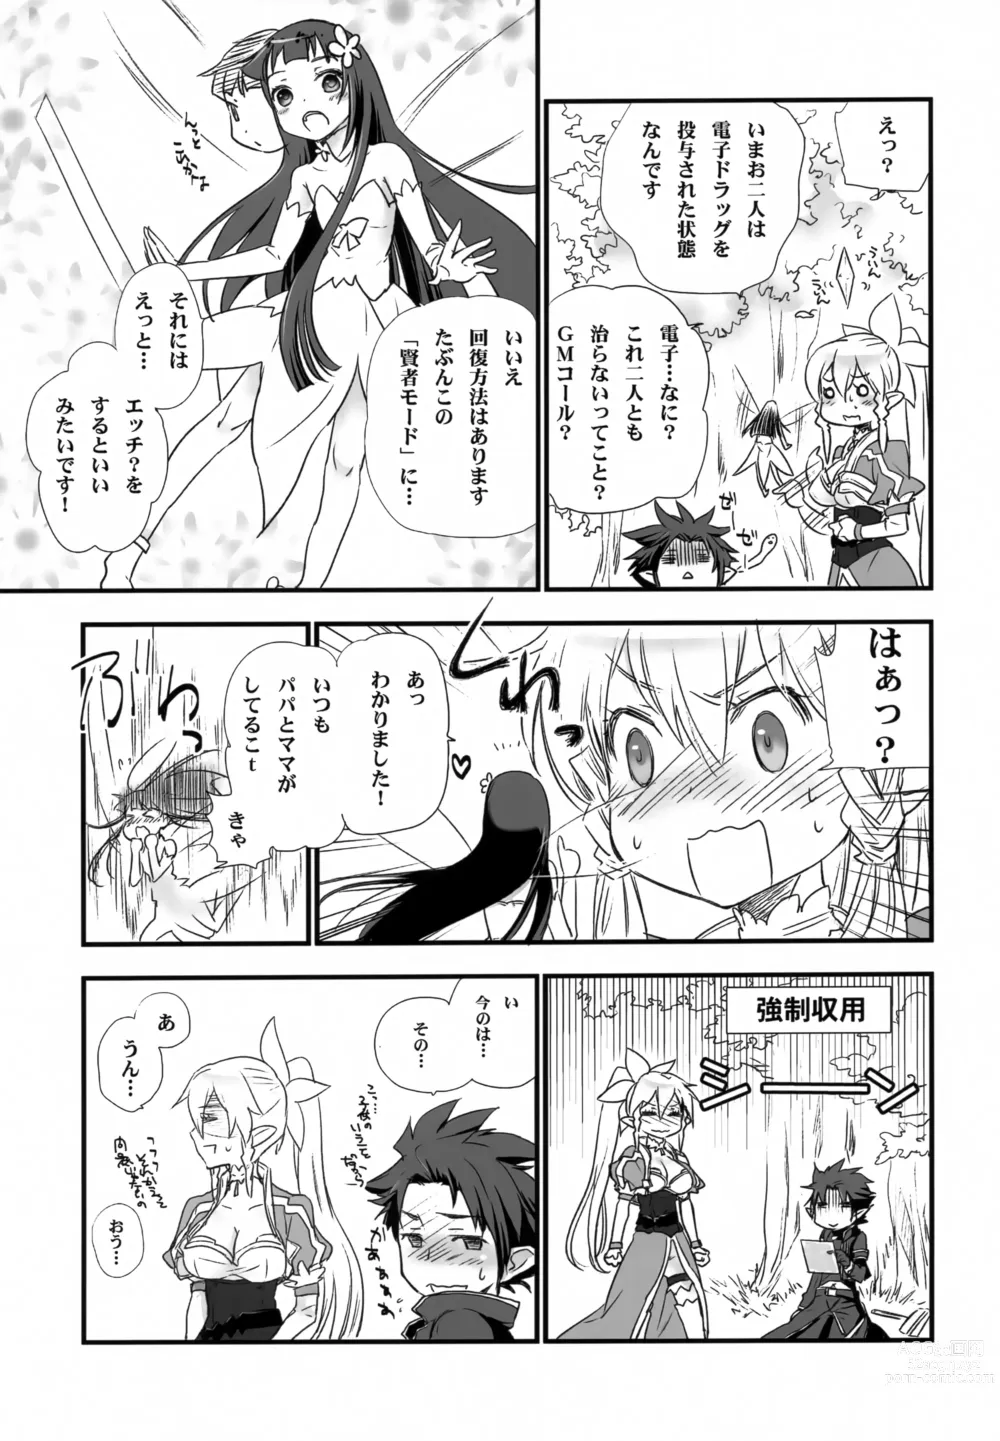 Page 10 of doujinshi Fairy Tail